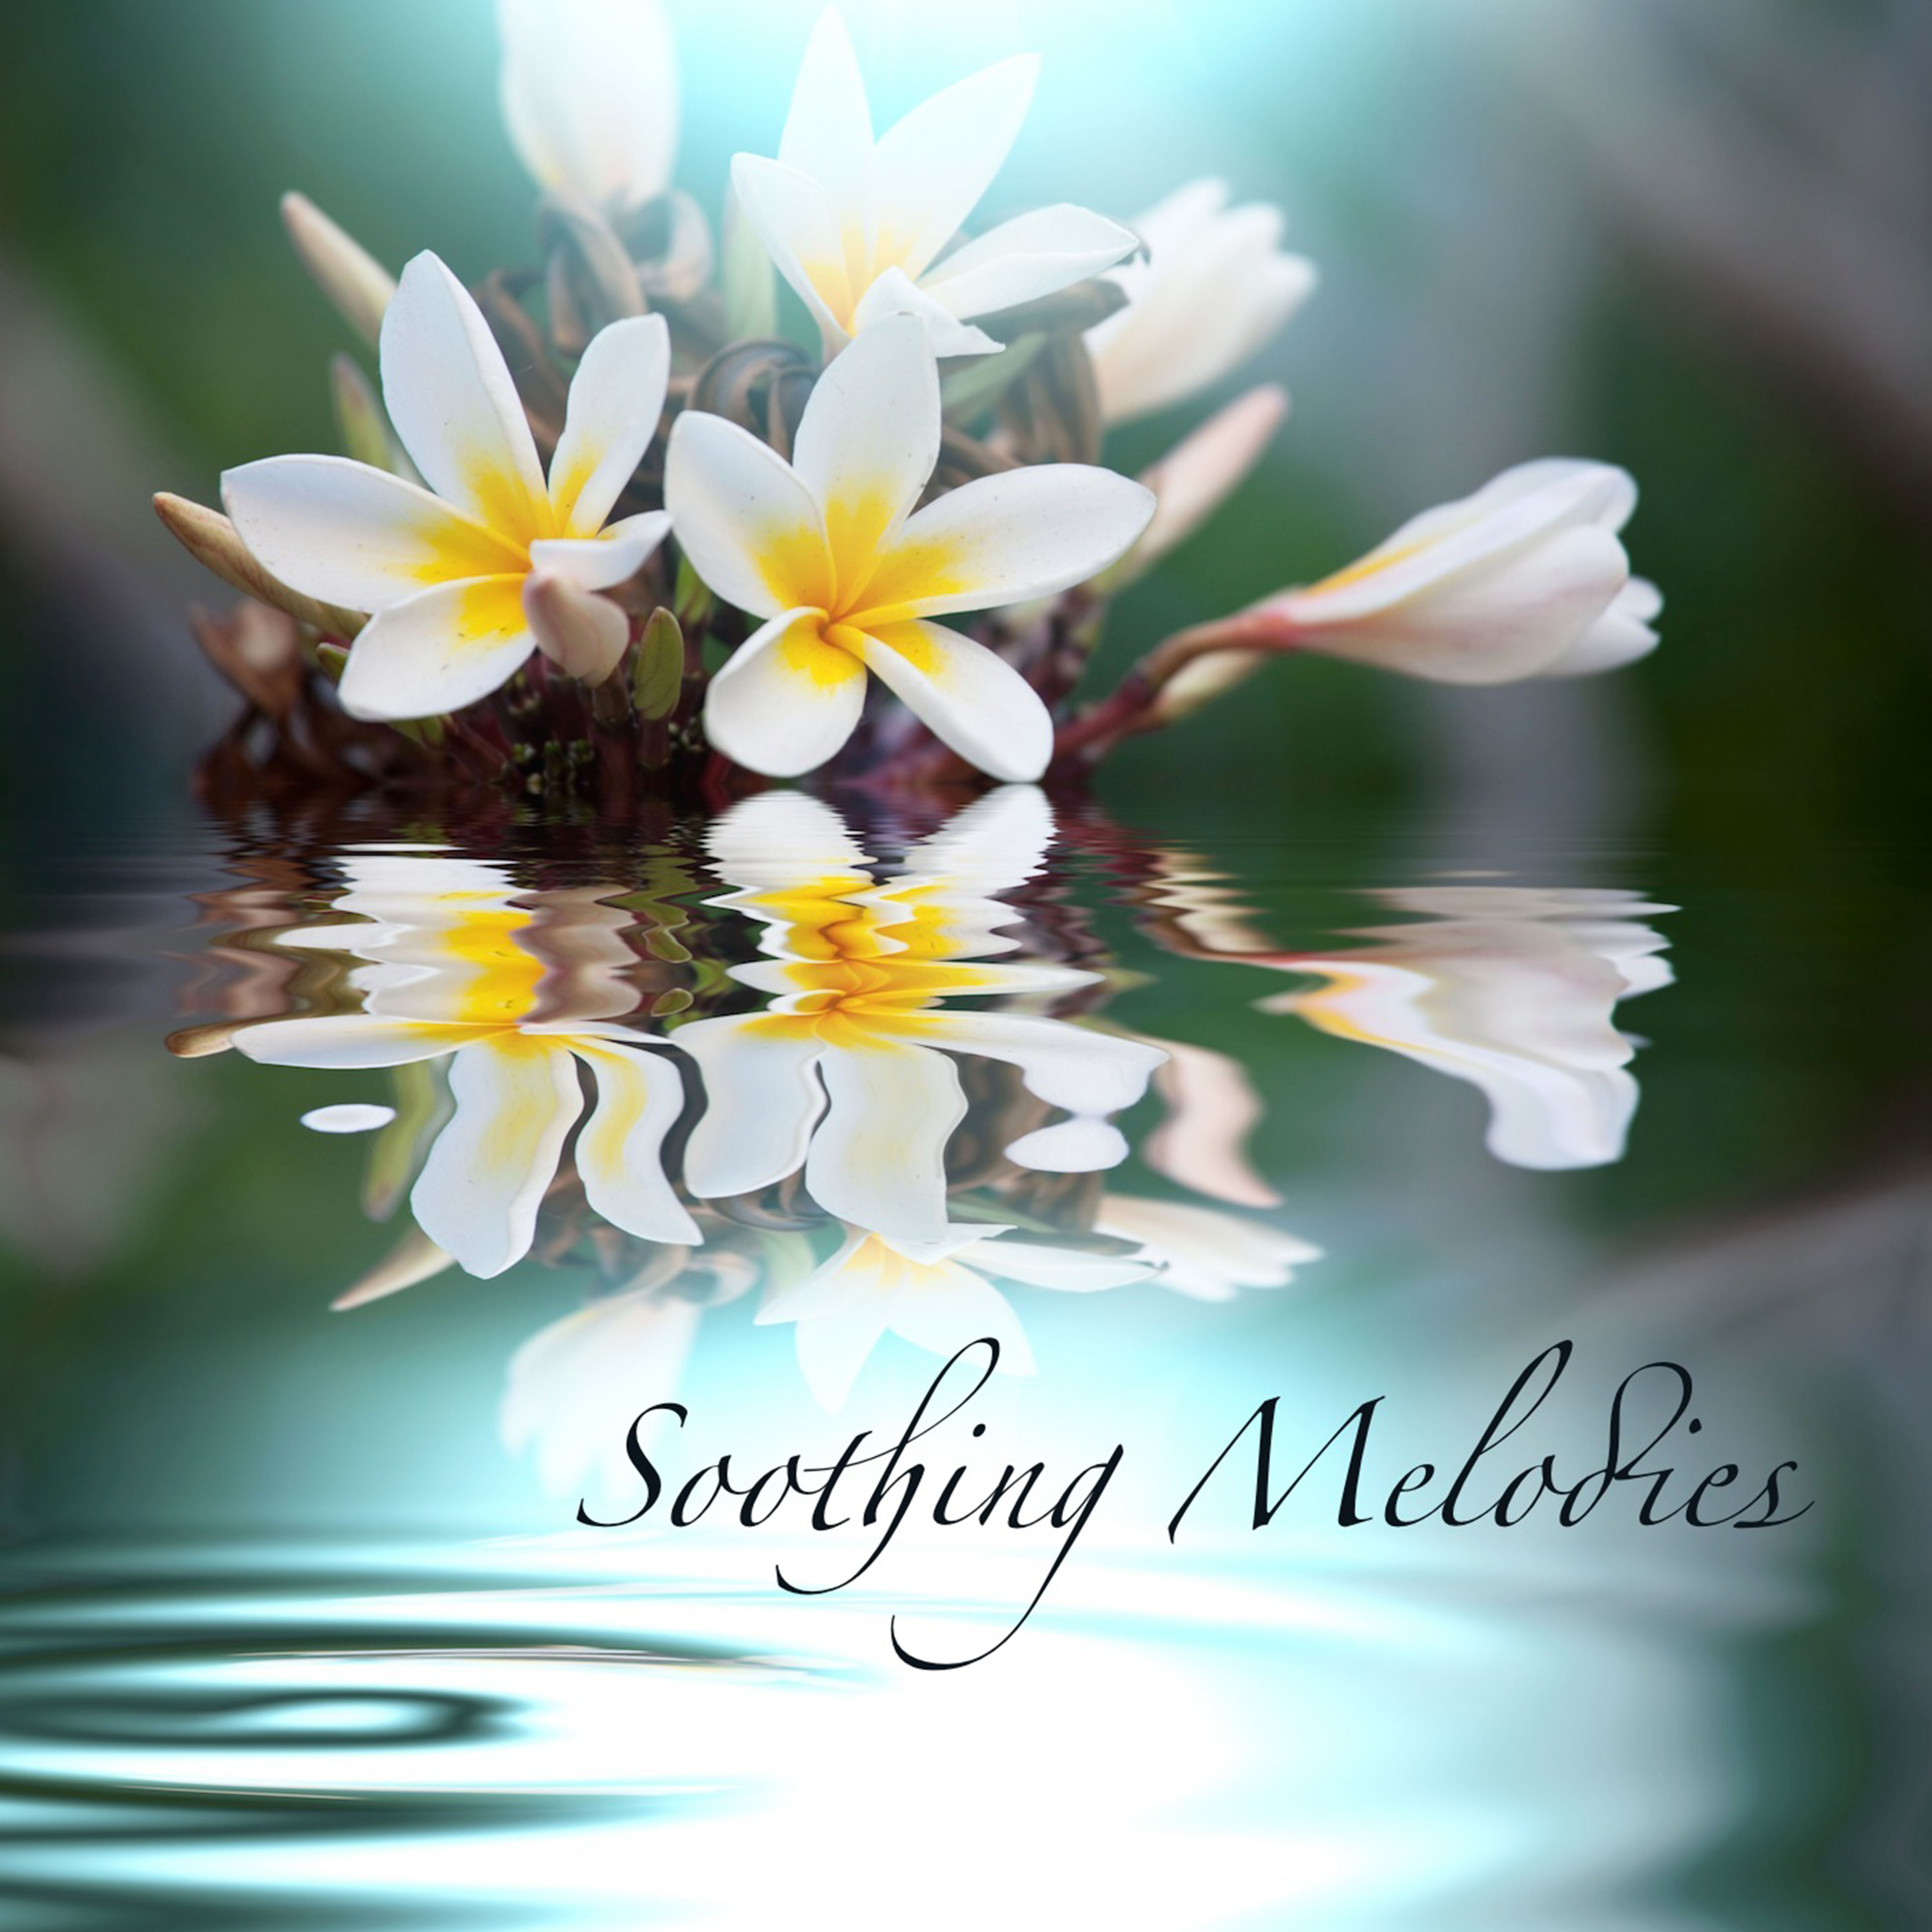 Soothing Melodies, Relaxing Healing Songs With Sounds of Nature, Water and Rain